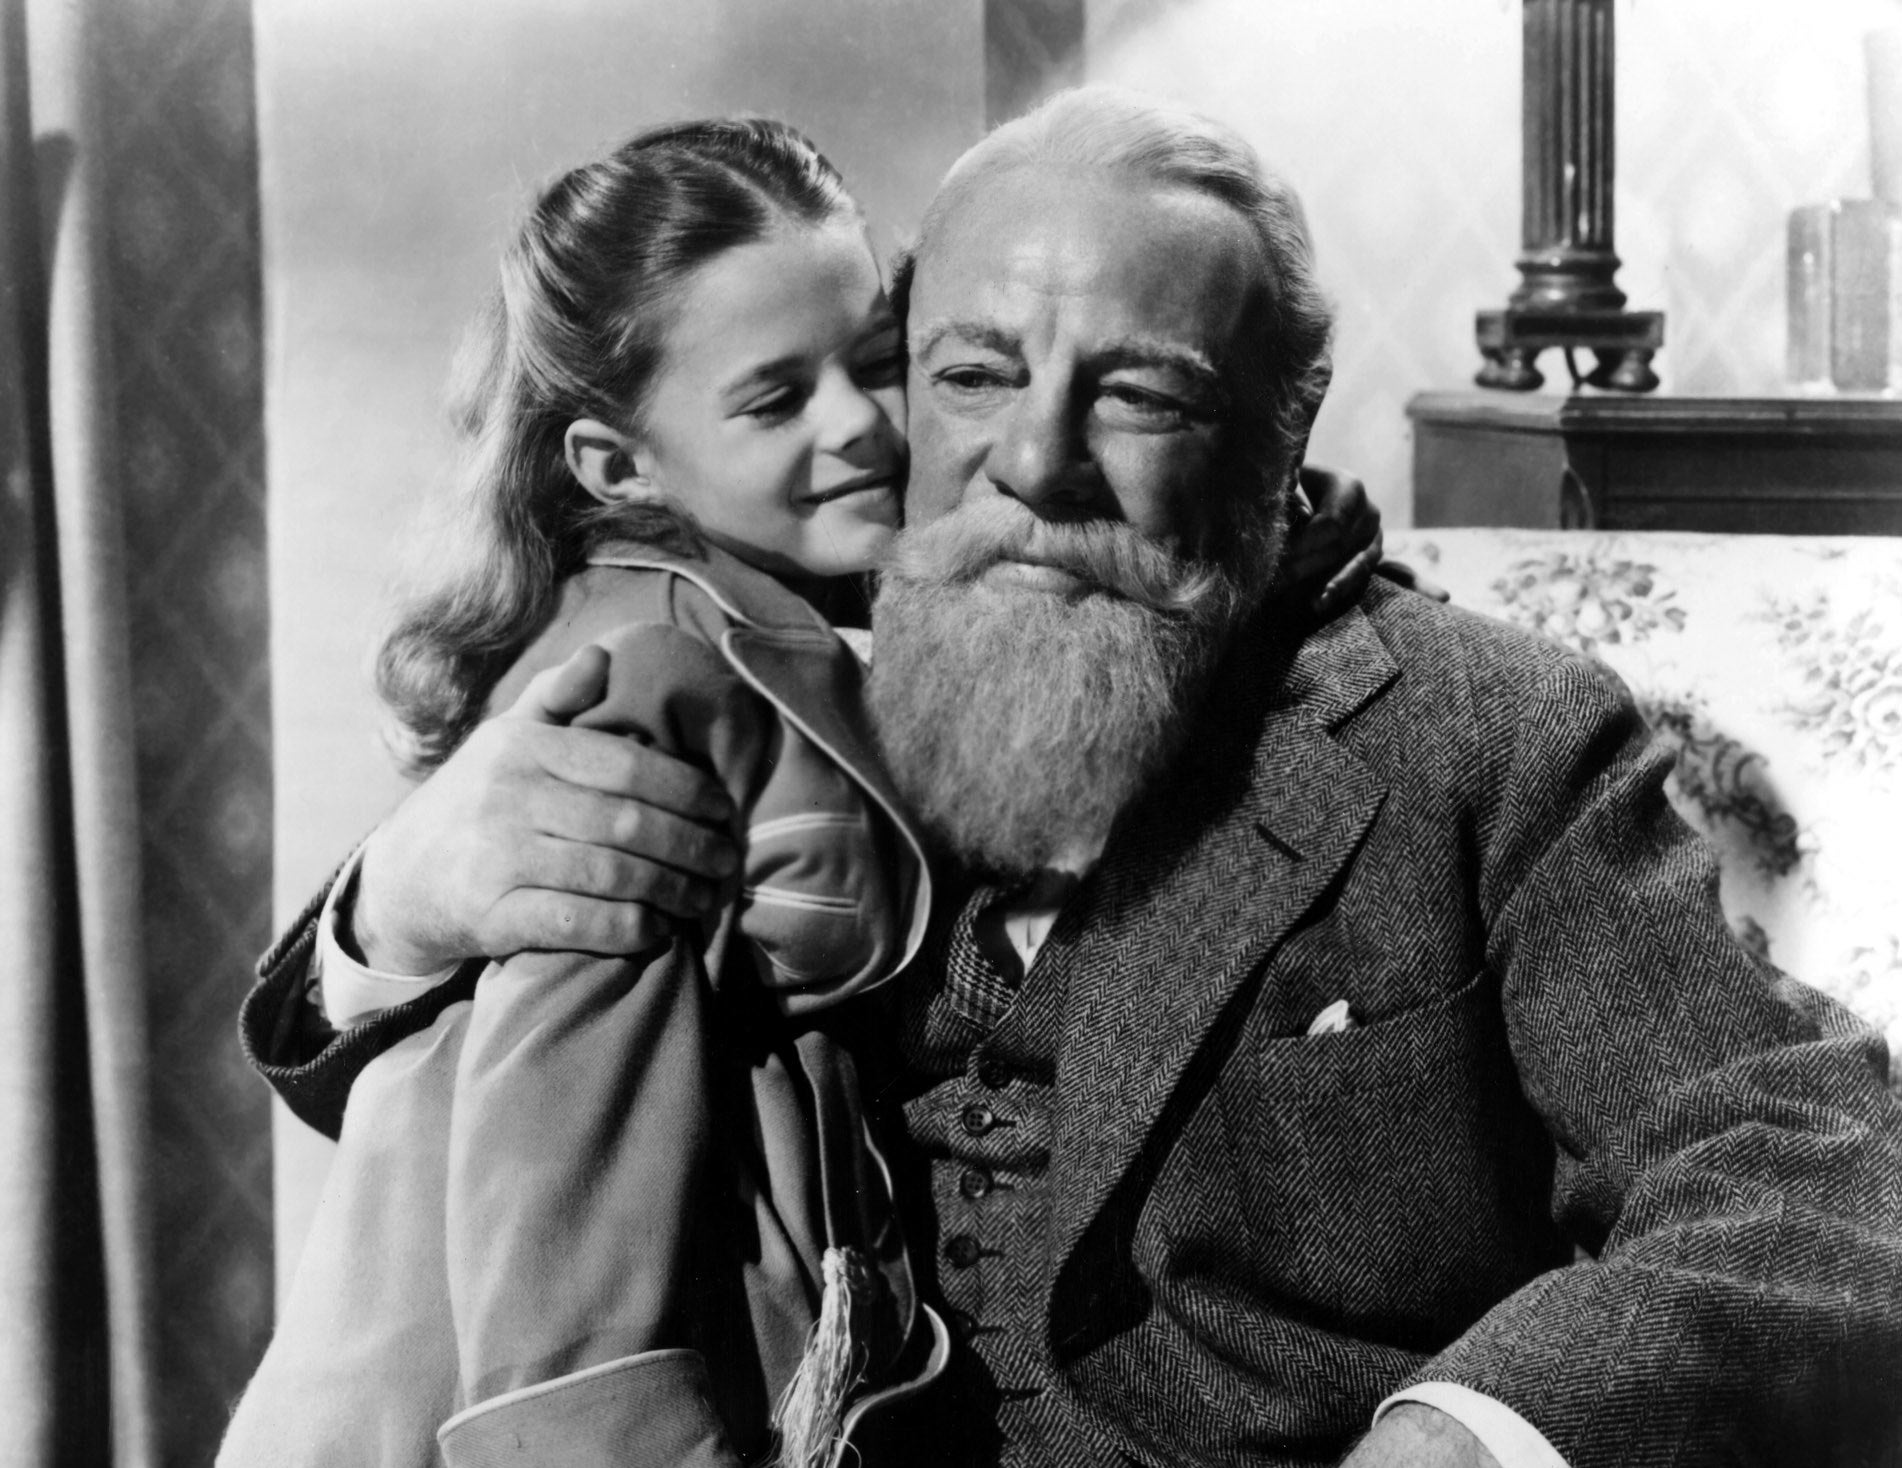 A young girl hugs Santa in &quot;Miracle on 34th Street&quot;